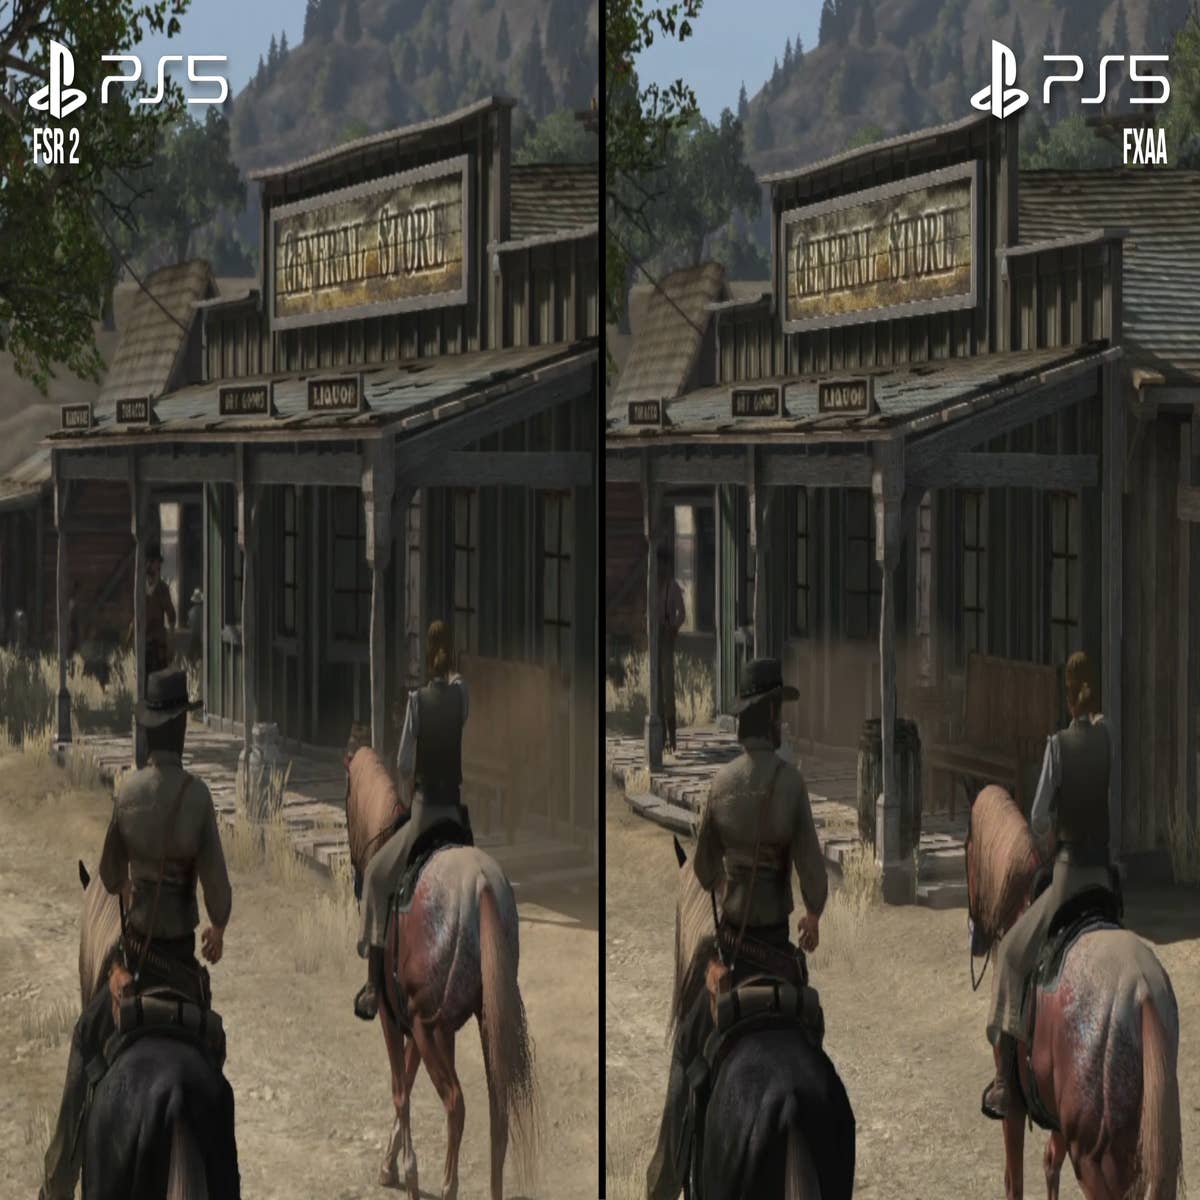 Red Dead Redemption finally playable on PC after 13 years